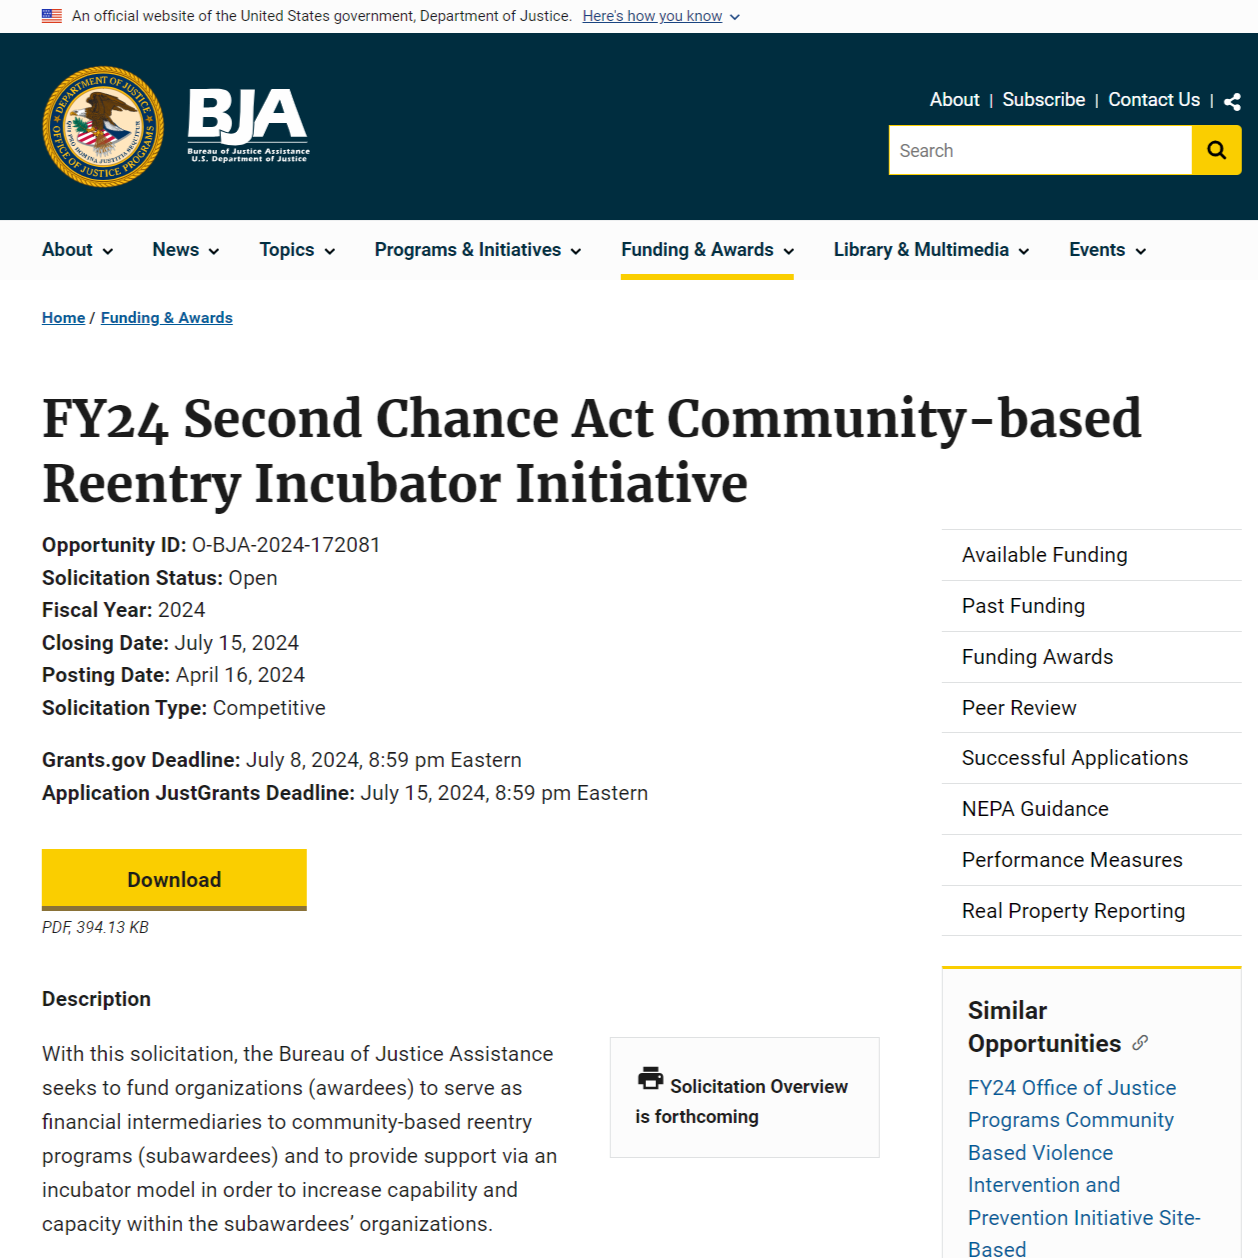 FY24 Second Chance Act Community-based Reentry Incubator Initiative